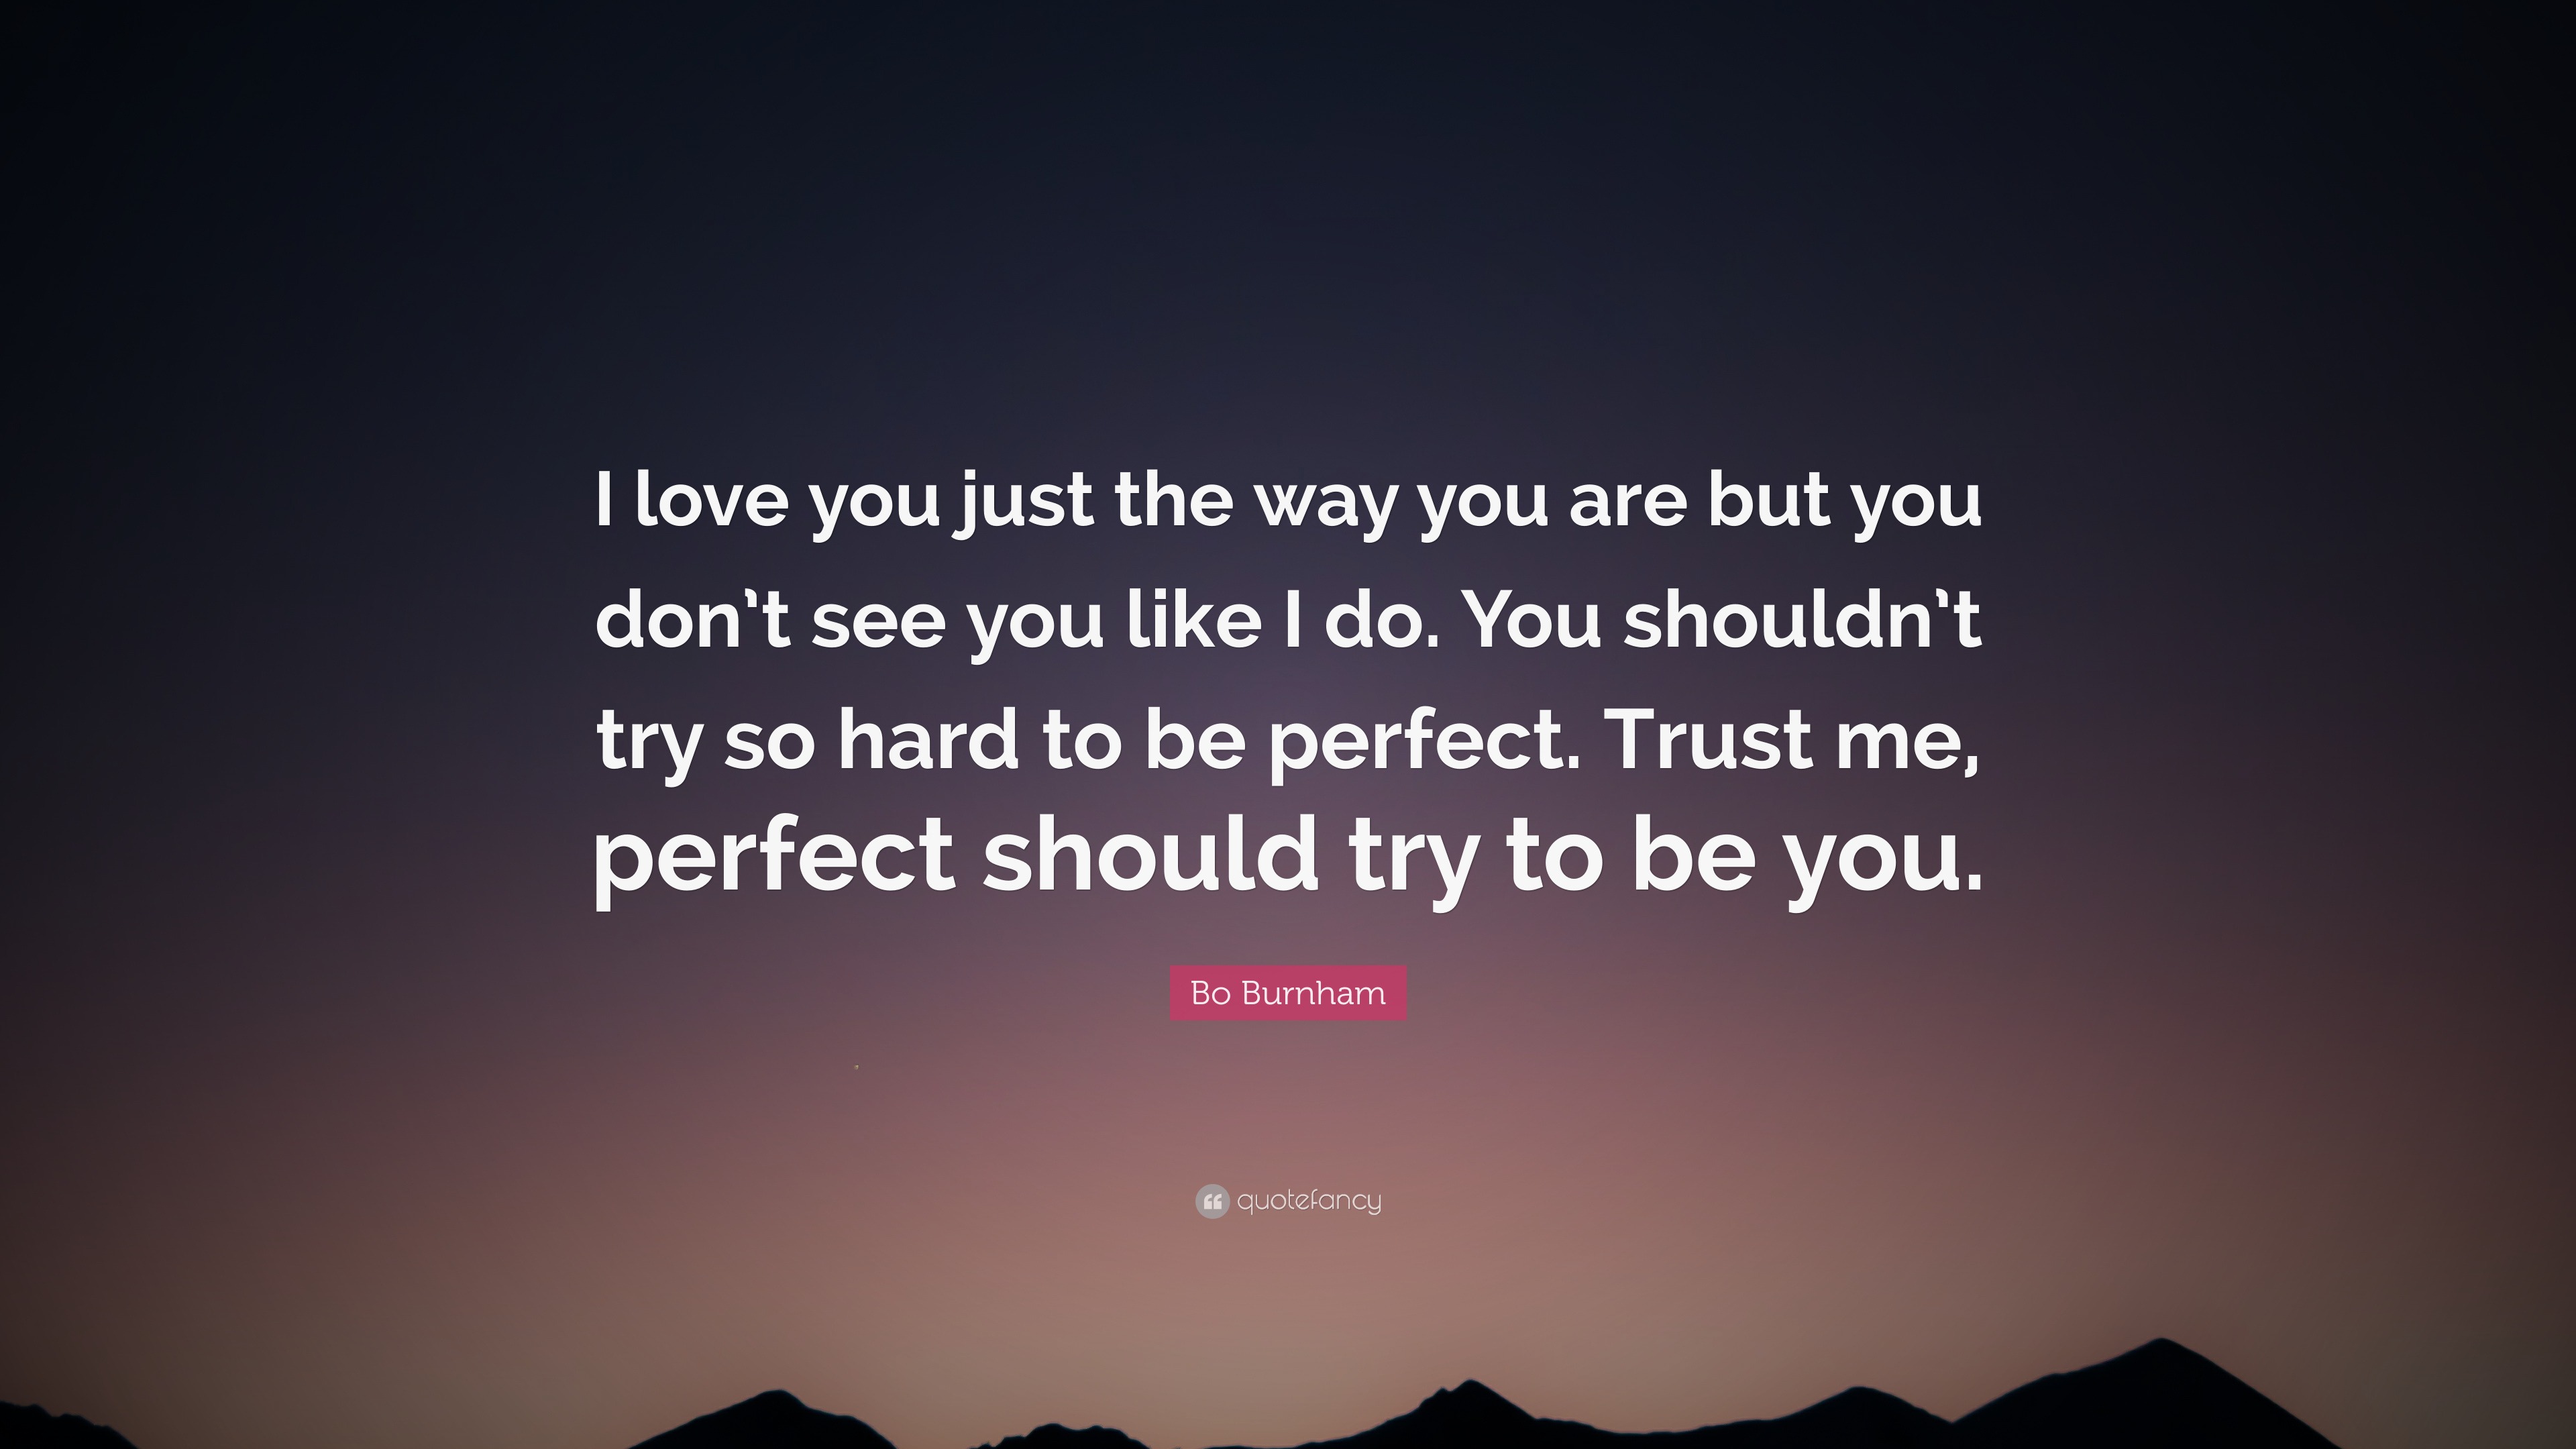 Bo Burnham Quote “i Love You Just The Way You Are But You Don T See You Like I Do You Shouldn